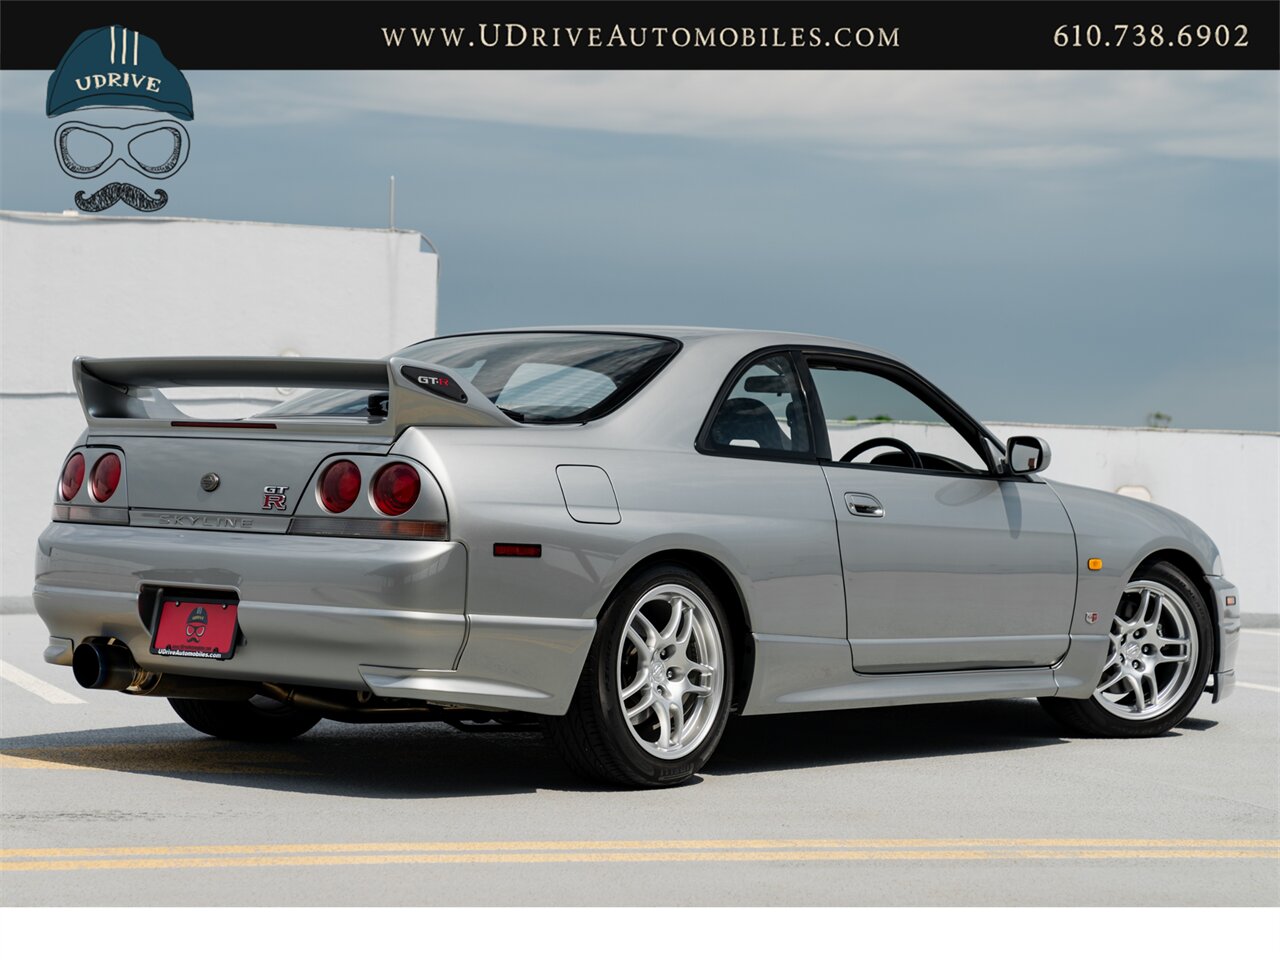 1997 Nissan Skyline GT-R R33 28k Miles Collector Grade  Motorex Legally Imported Titled Federalized Service History - Photo 2 - West Chester, PA 19382